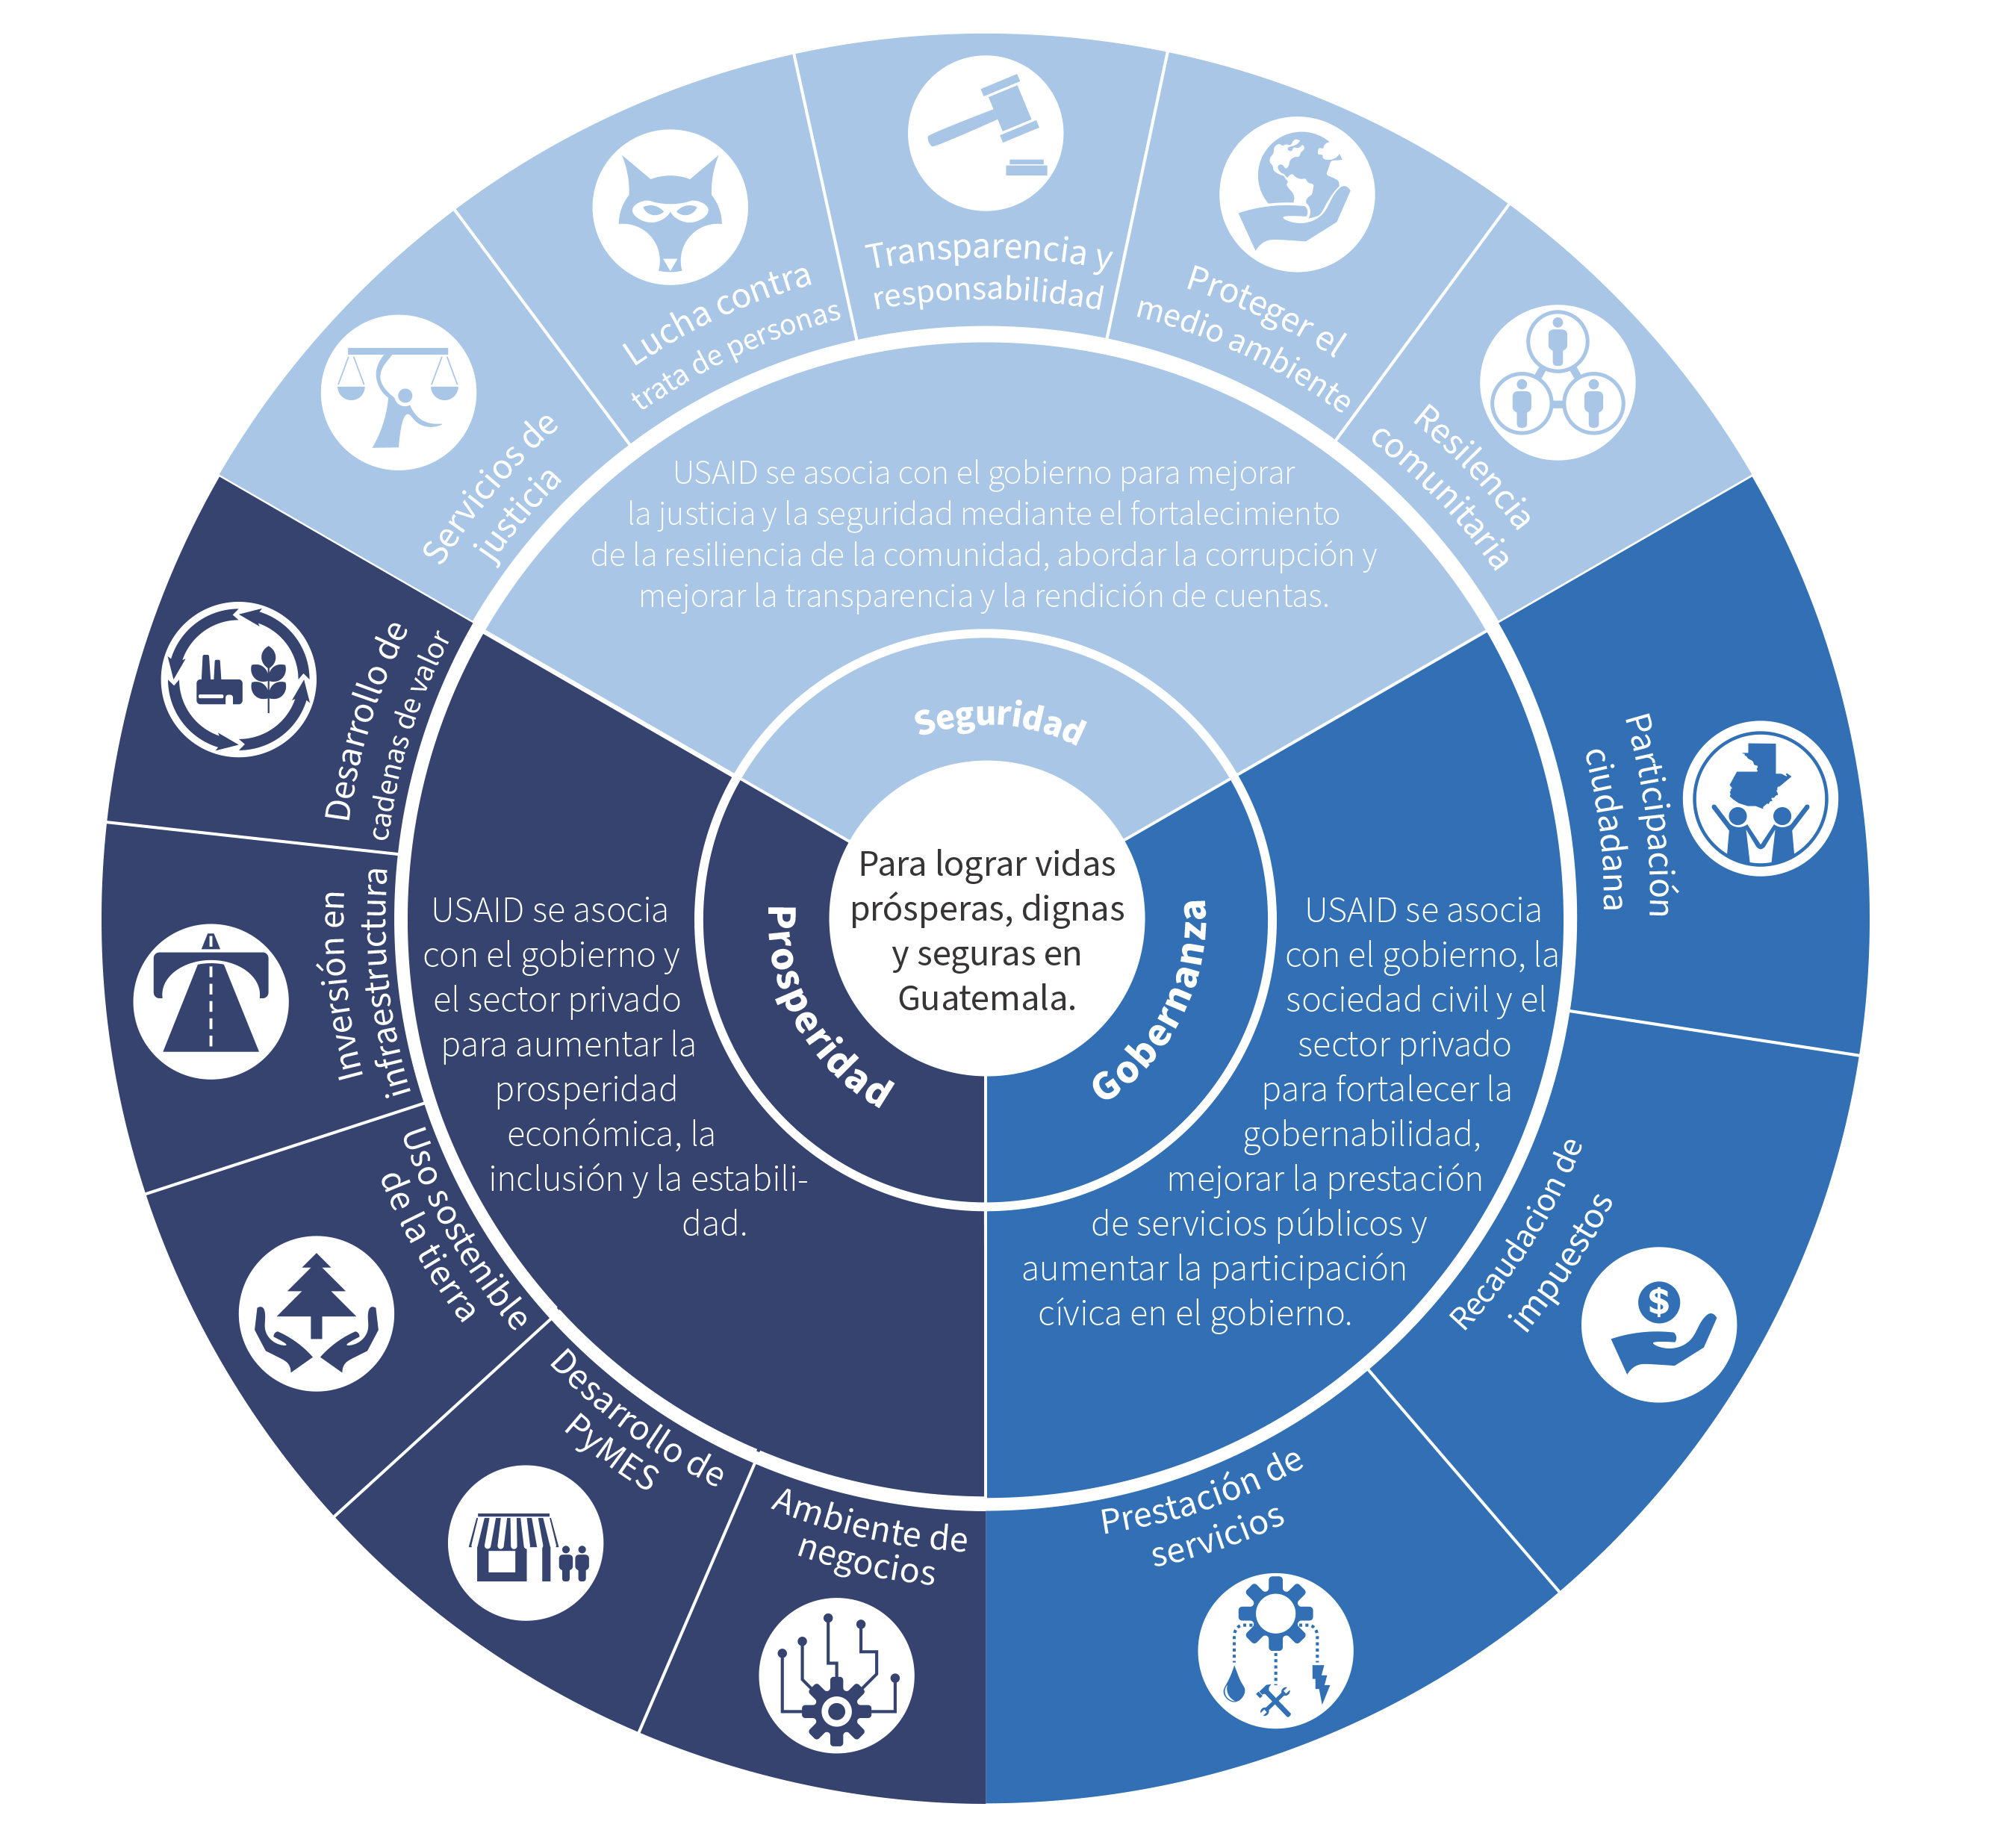 Circular graphic depicting three pillars of countering migration, and their supporting activities